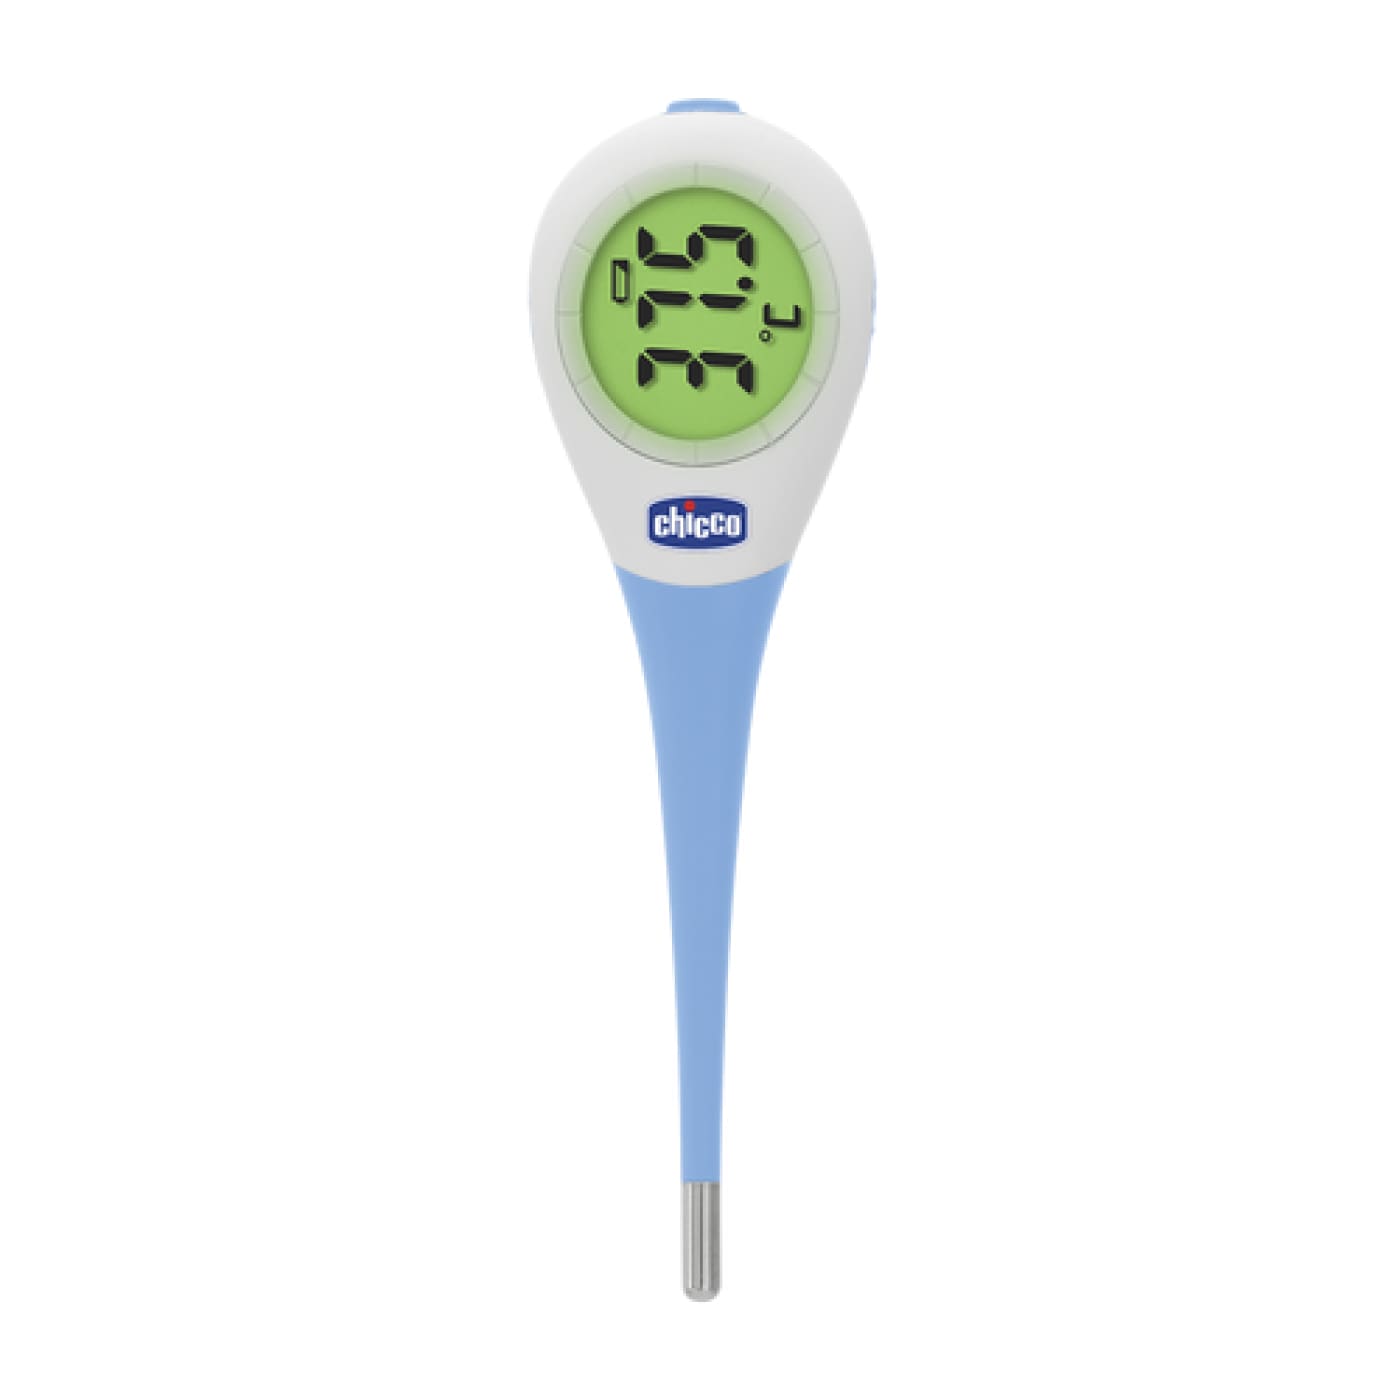 Chicco Flex Night Digital Thermometer - HEALTH & HOME SAFETY - THERMOMETERS/MEDICINAL